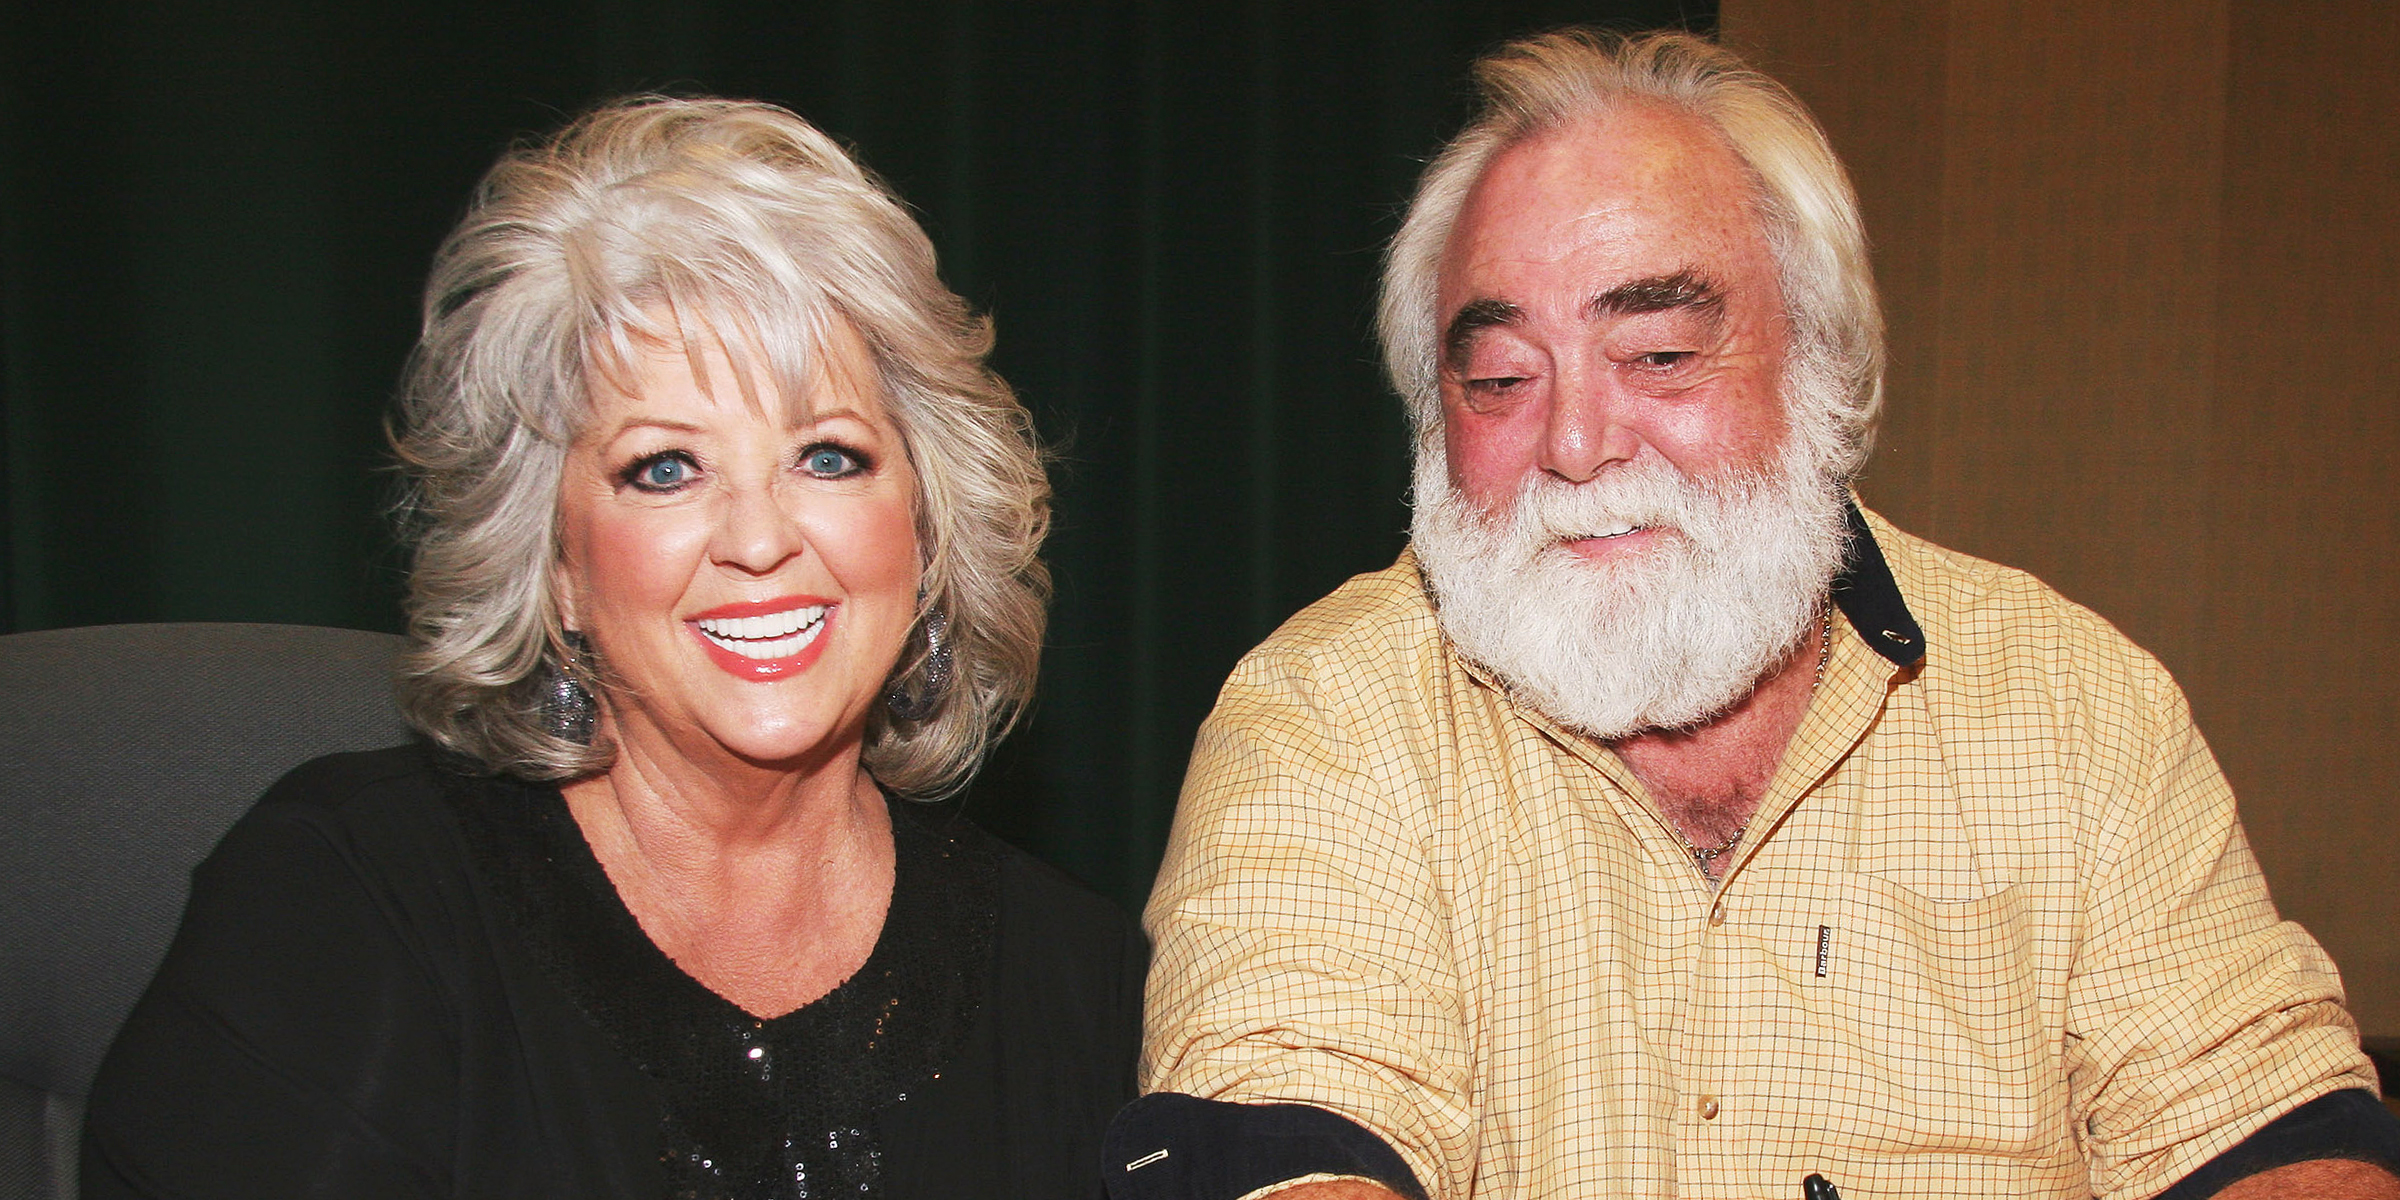 Paula Deen and Michael Groover. | Source: Getty Images